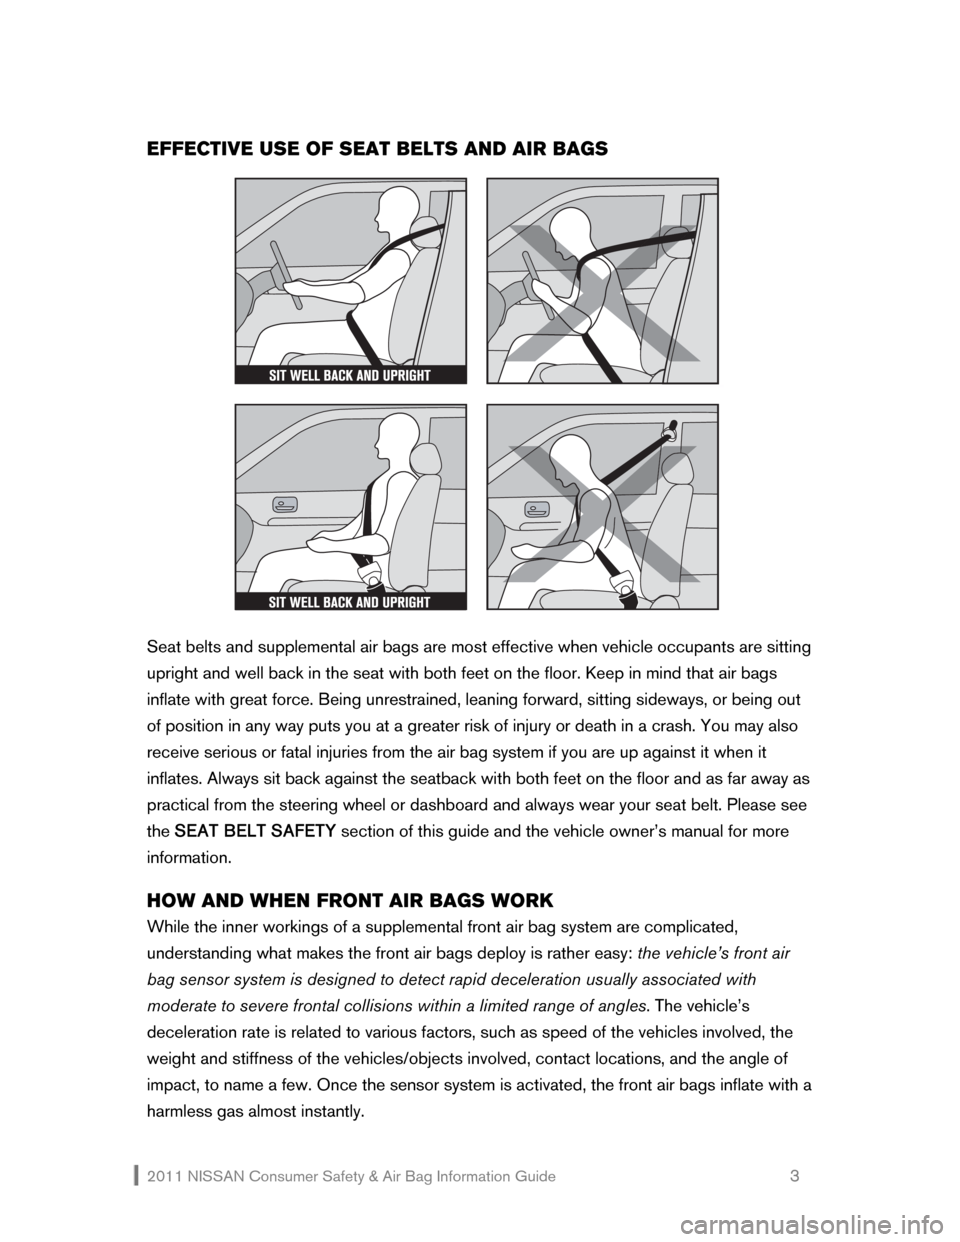 NISSAN ROGUE 2011 1.G Consumer Safety Air Bag Information Guide 2011 NISSAN Consumer Safety & Air Bag Information Guide                                                       3 
EFFECTIVE USE OF SEAT BELTS AND AIR BAGS 
 
 
 
Seat belts and supplemental air bags ar